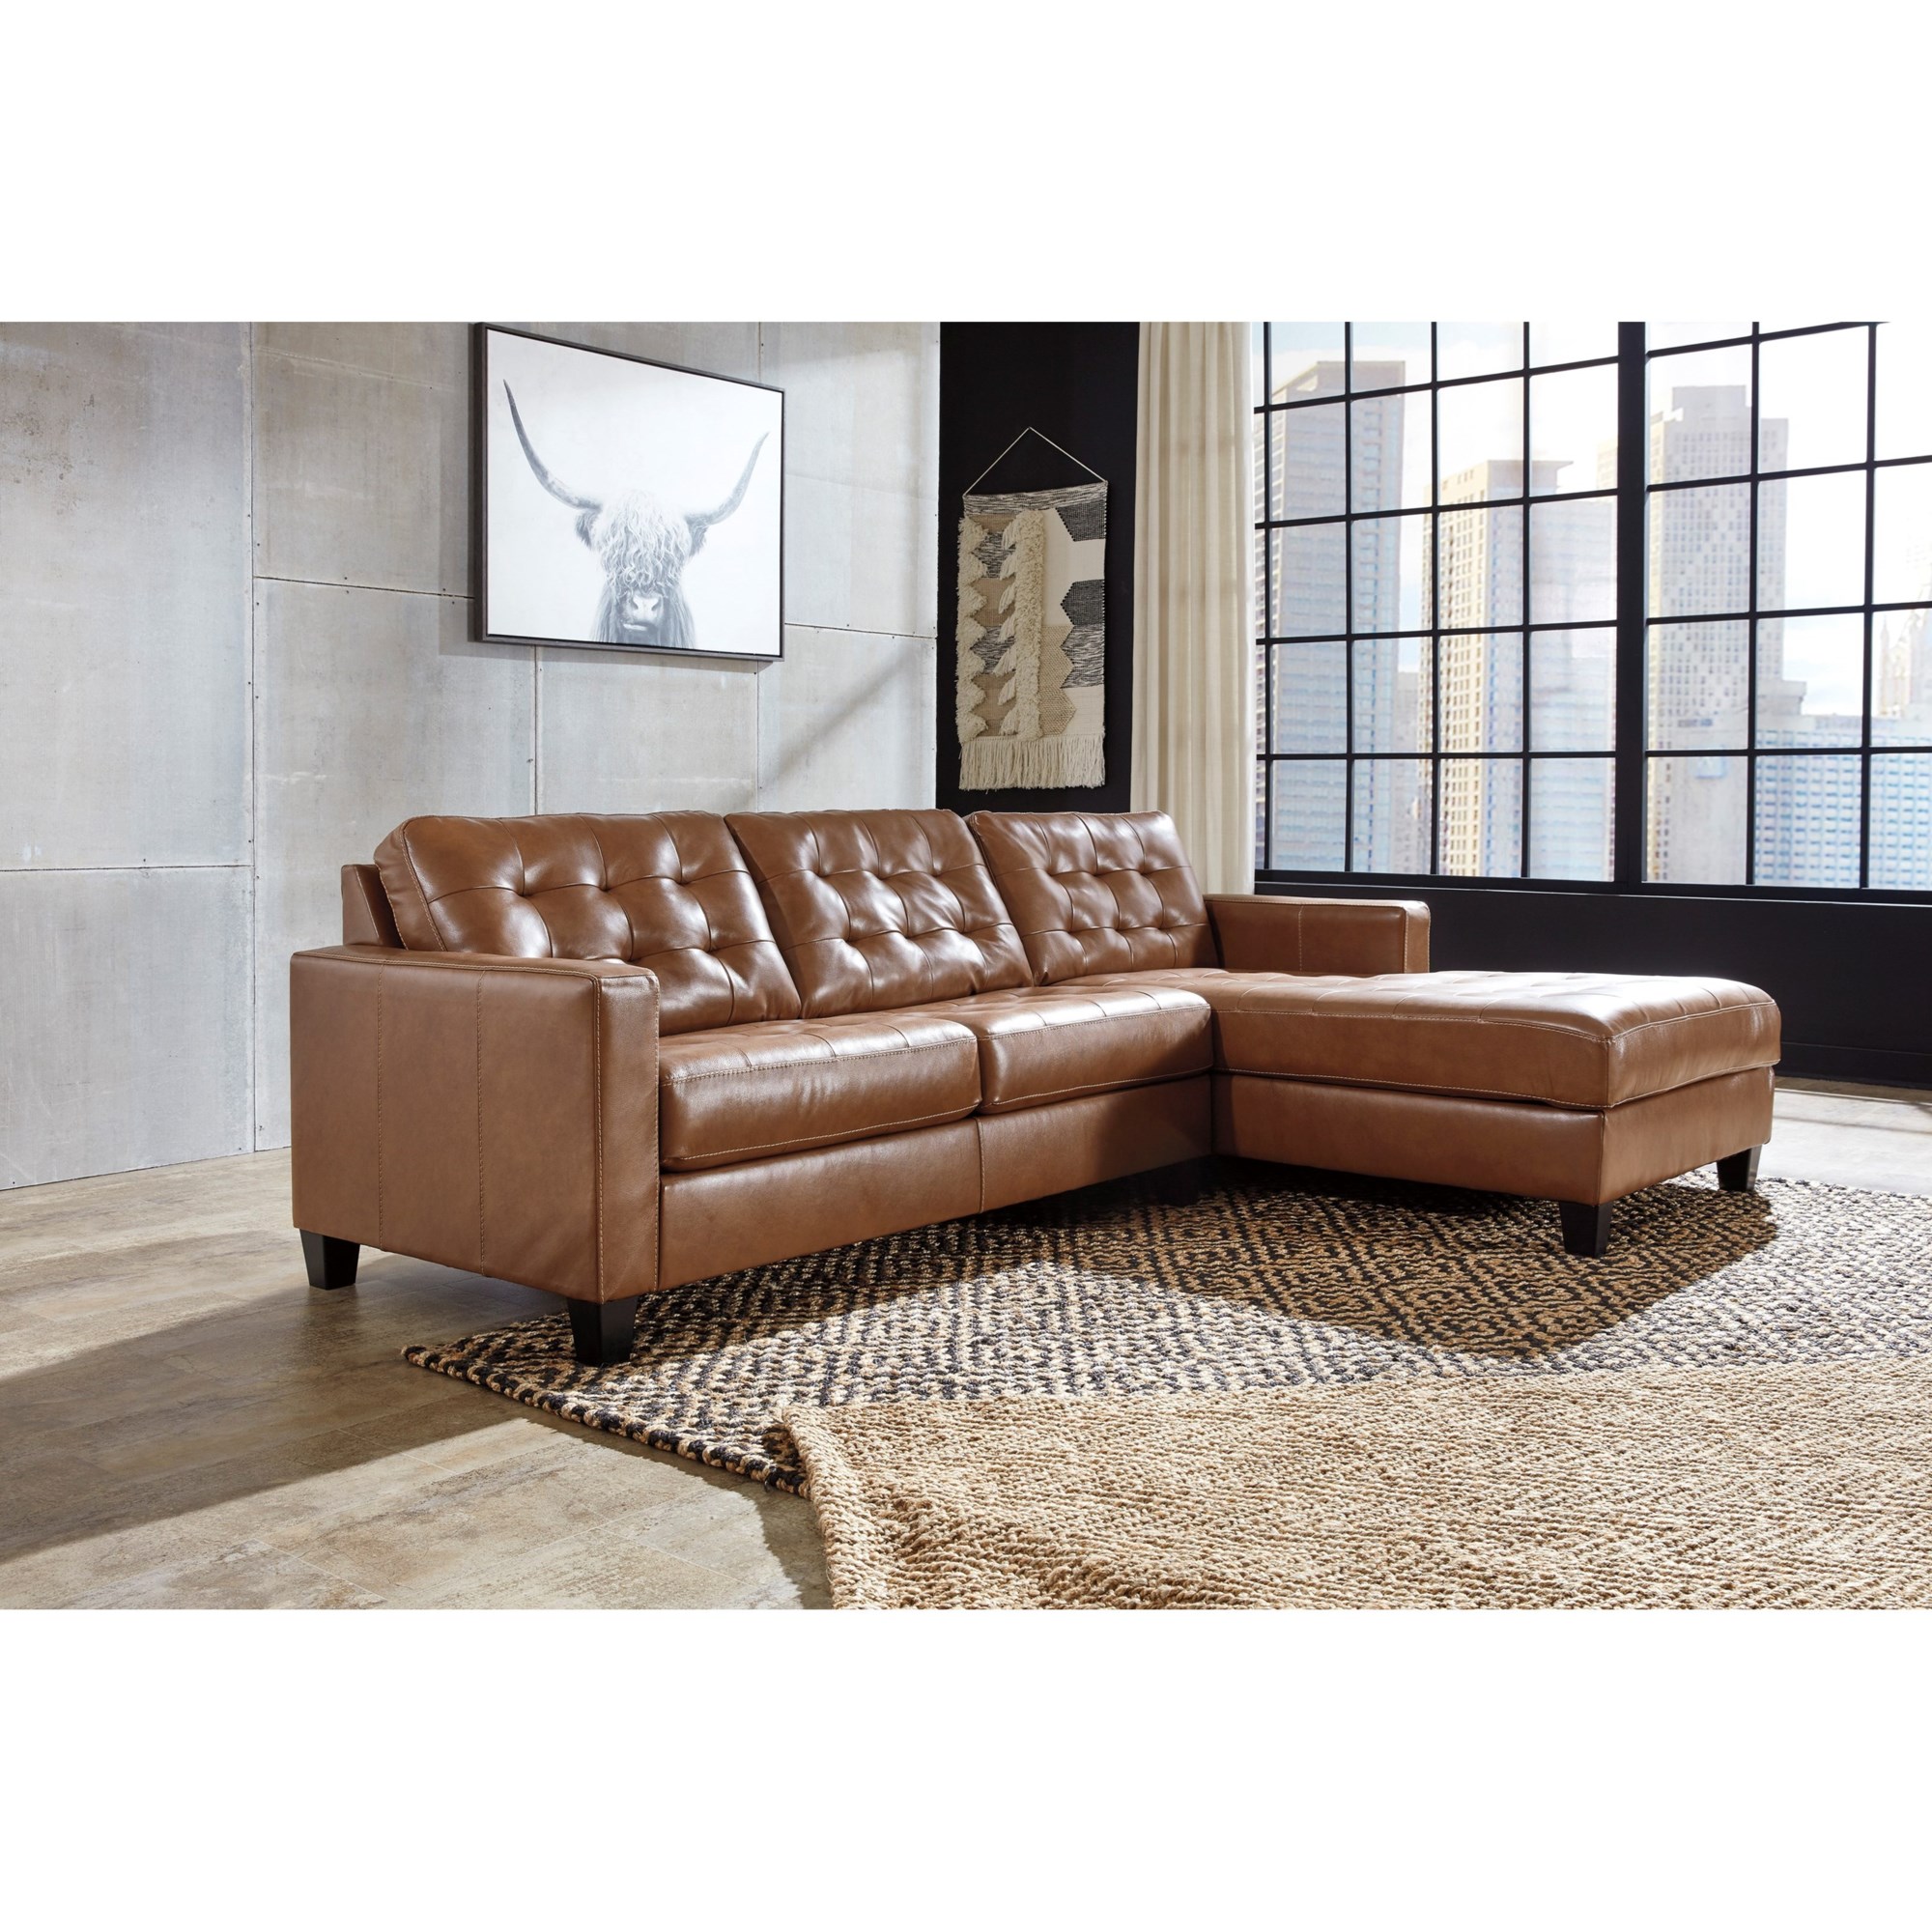 Signature Design by Ashley Baskove 11102S3 Leather Match 2-Piece Sectional  with Chaise and Tufting | Furniture and ApplianceMart | Sectional - Sofa  Groups